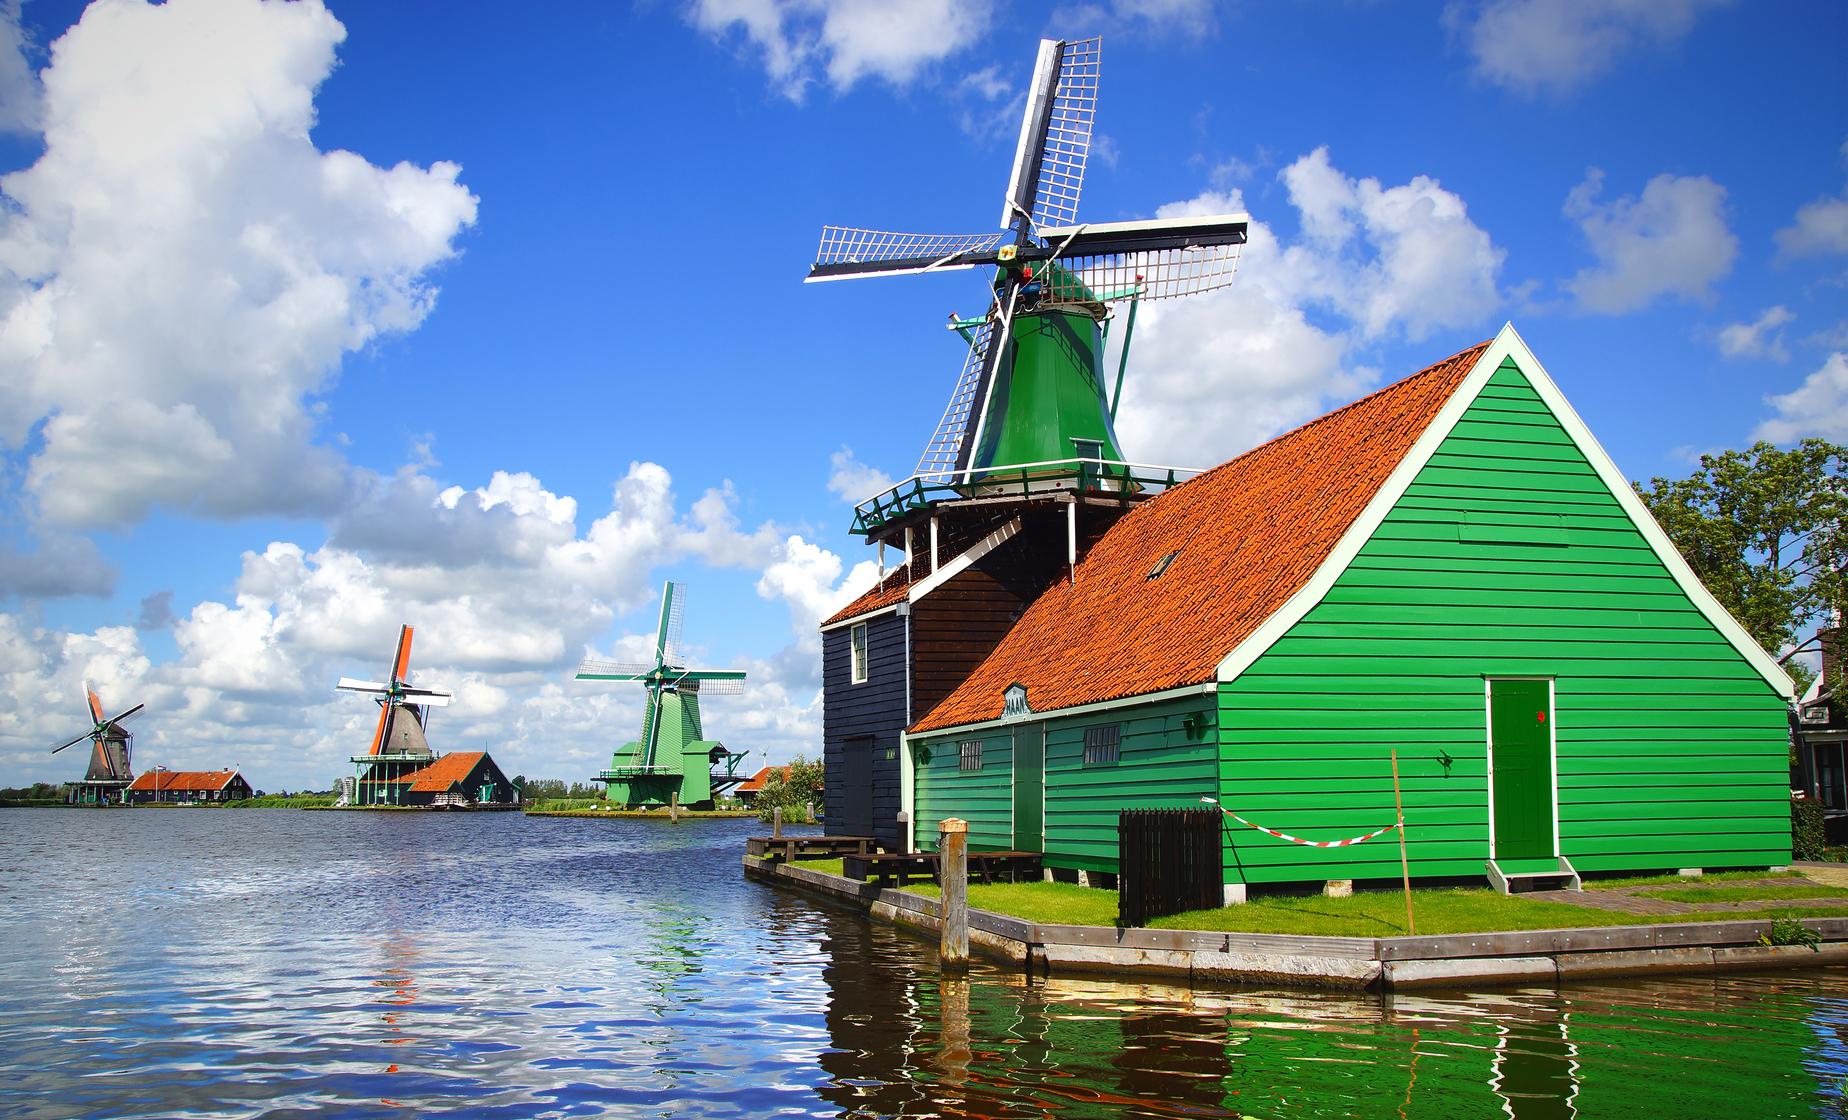 Private City and Windmill Tour in Amsterdam (Zaanse Schans, Amstel River)